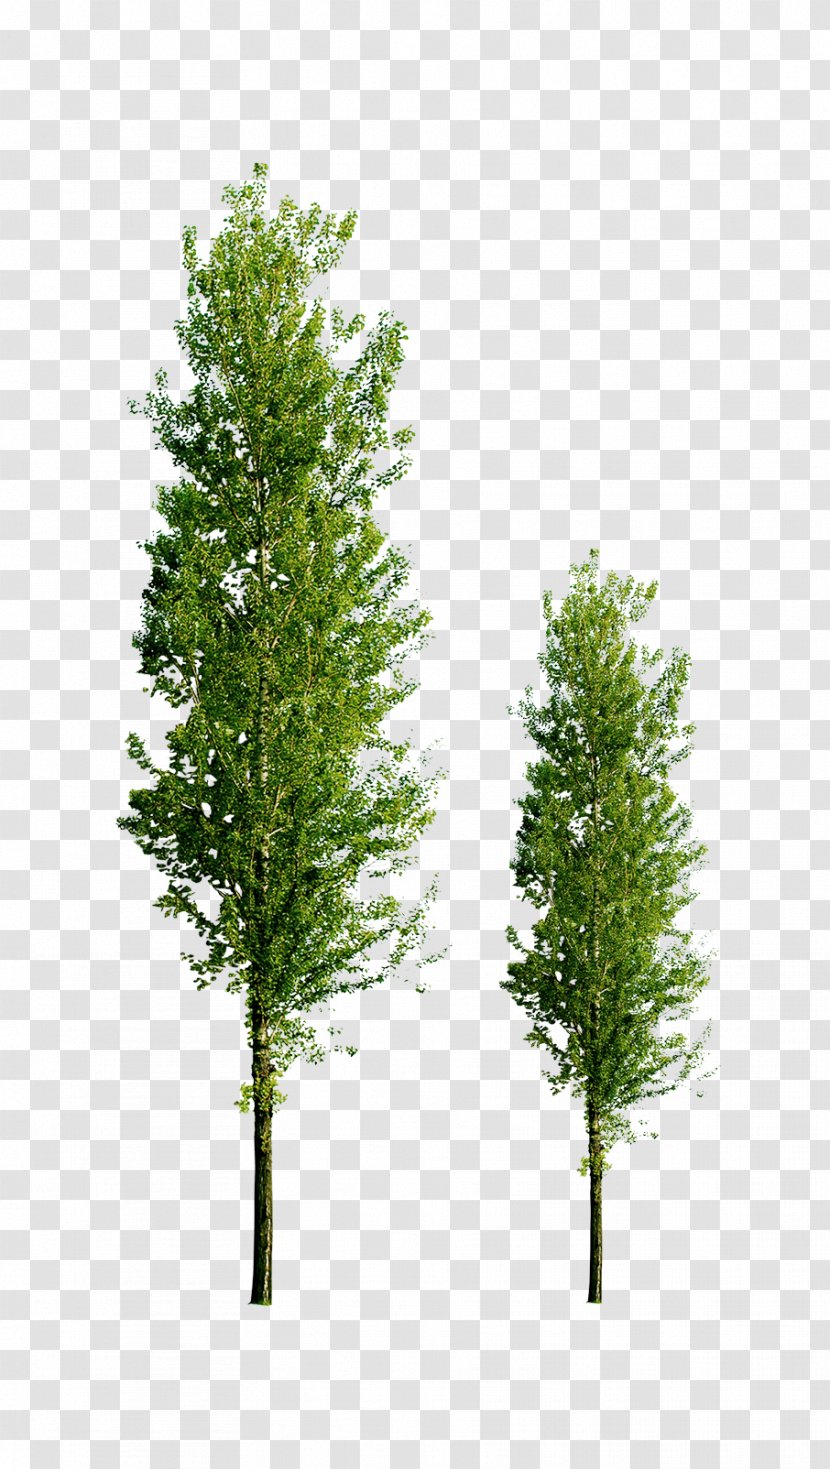 Tree Company Information - Twig - Green Trees Transparent PNG